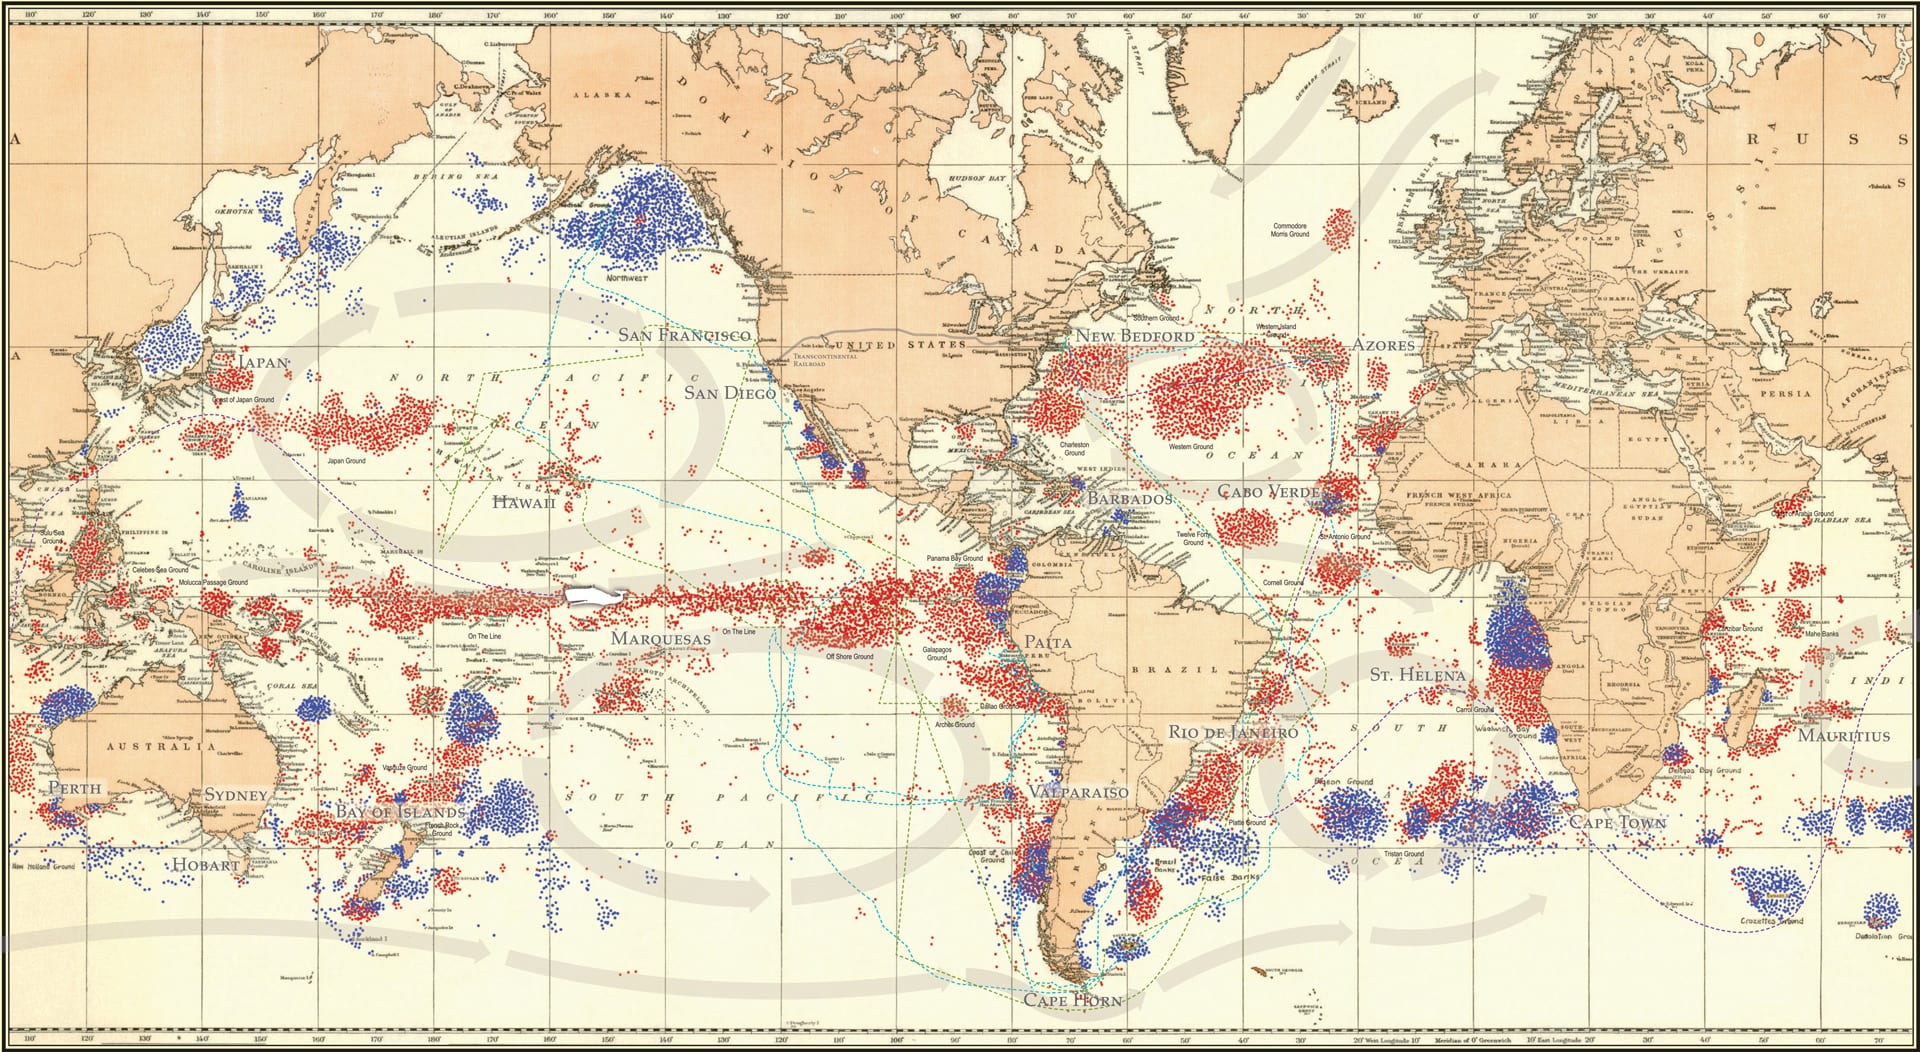 Whalers from New England covered a wide span of the globe, often traveling to remote locations that merchant and military vessels didn’t venture to. This composite whaling map, collated from four original maps prepared under the direction of Charles Haskins Townsend, shows the historical distribution of various types of whales taken by New England/American whaling ships between 1785-1913. Each color represents the position of a ship on a day when one or more whales were taken. (Image courtesy of the New Bedford Whaling Museum)